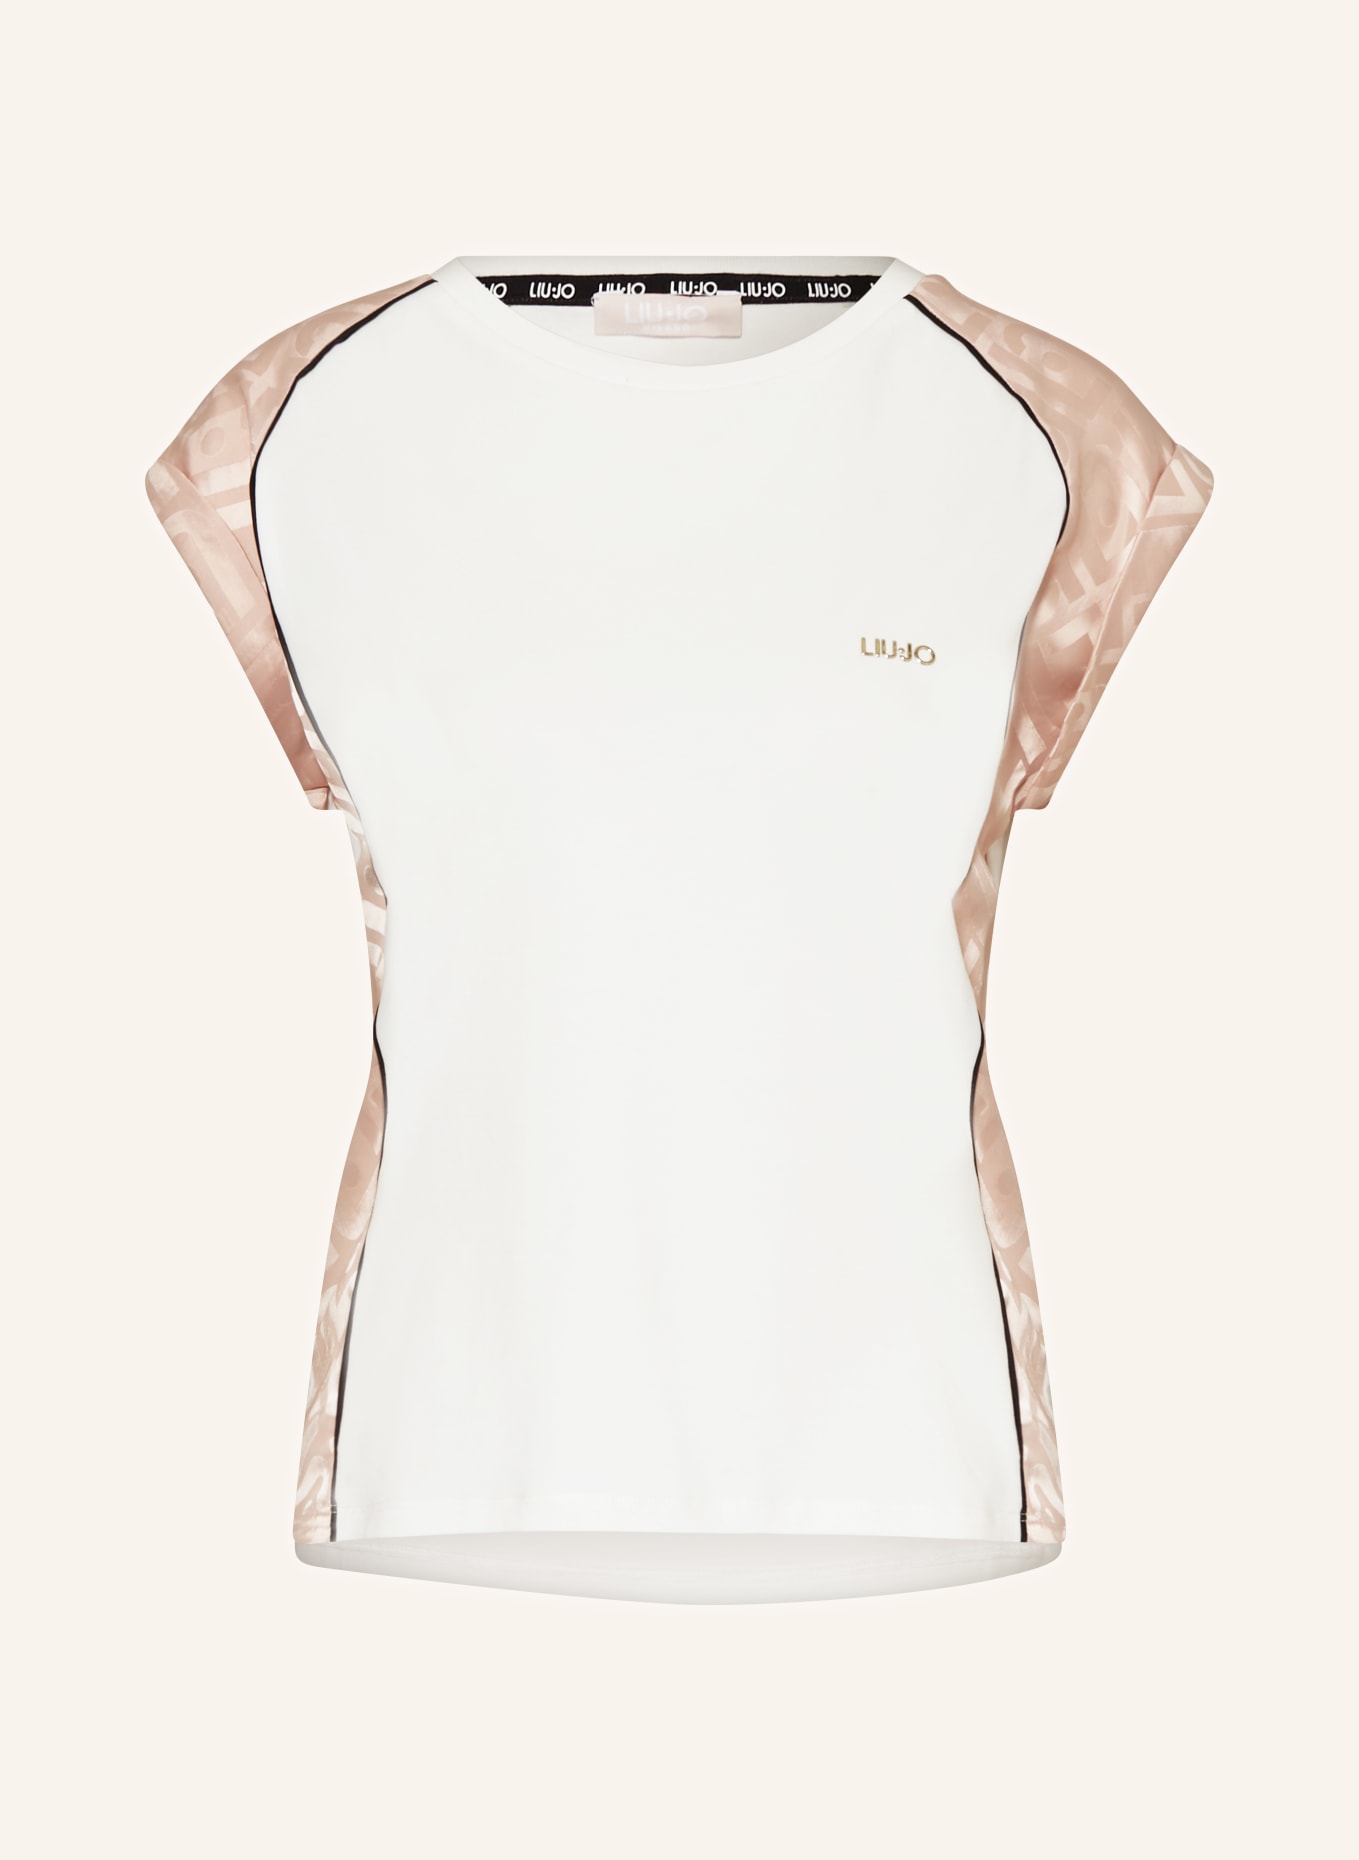 LIU JO T-shirt in mixed materials, Color: WHITE/ PINK (Image 1)